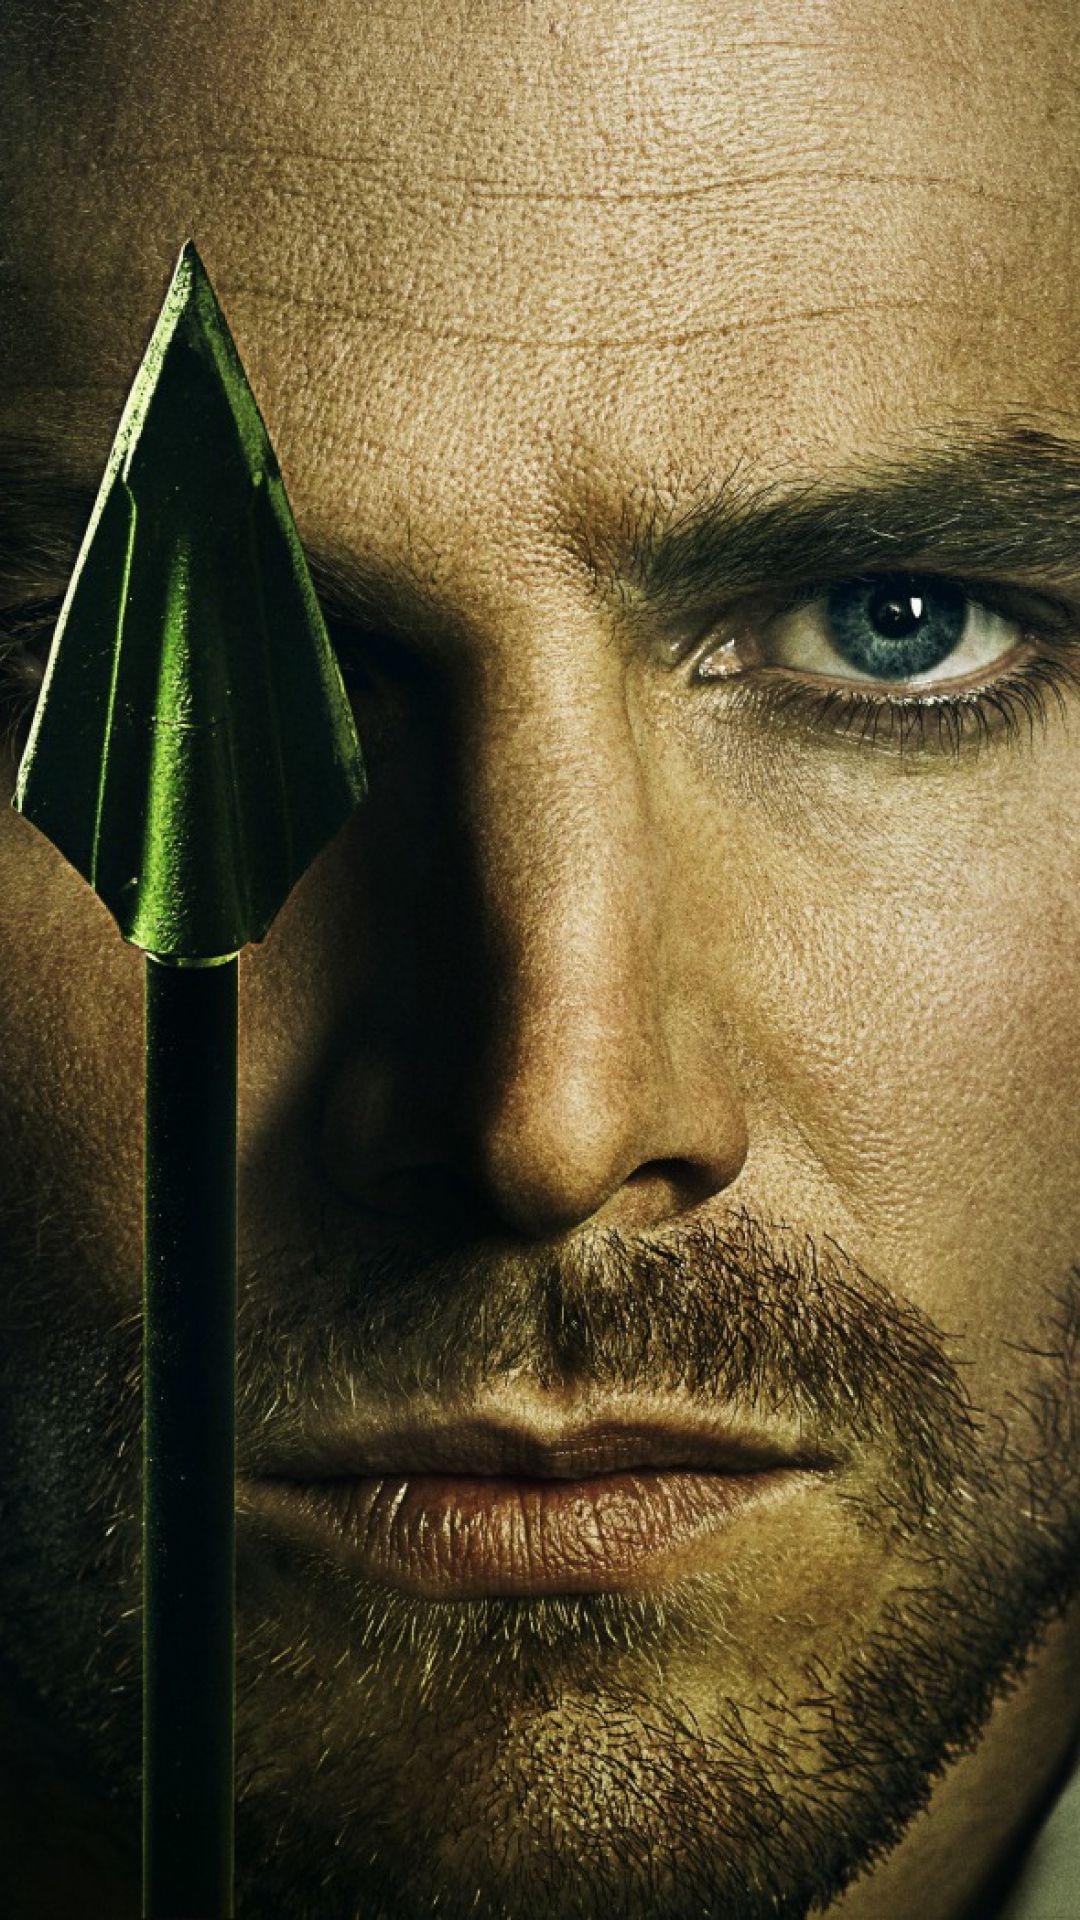 Arrow series, Android wallpaper, Free download, 1080x1920 Full HD Handy